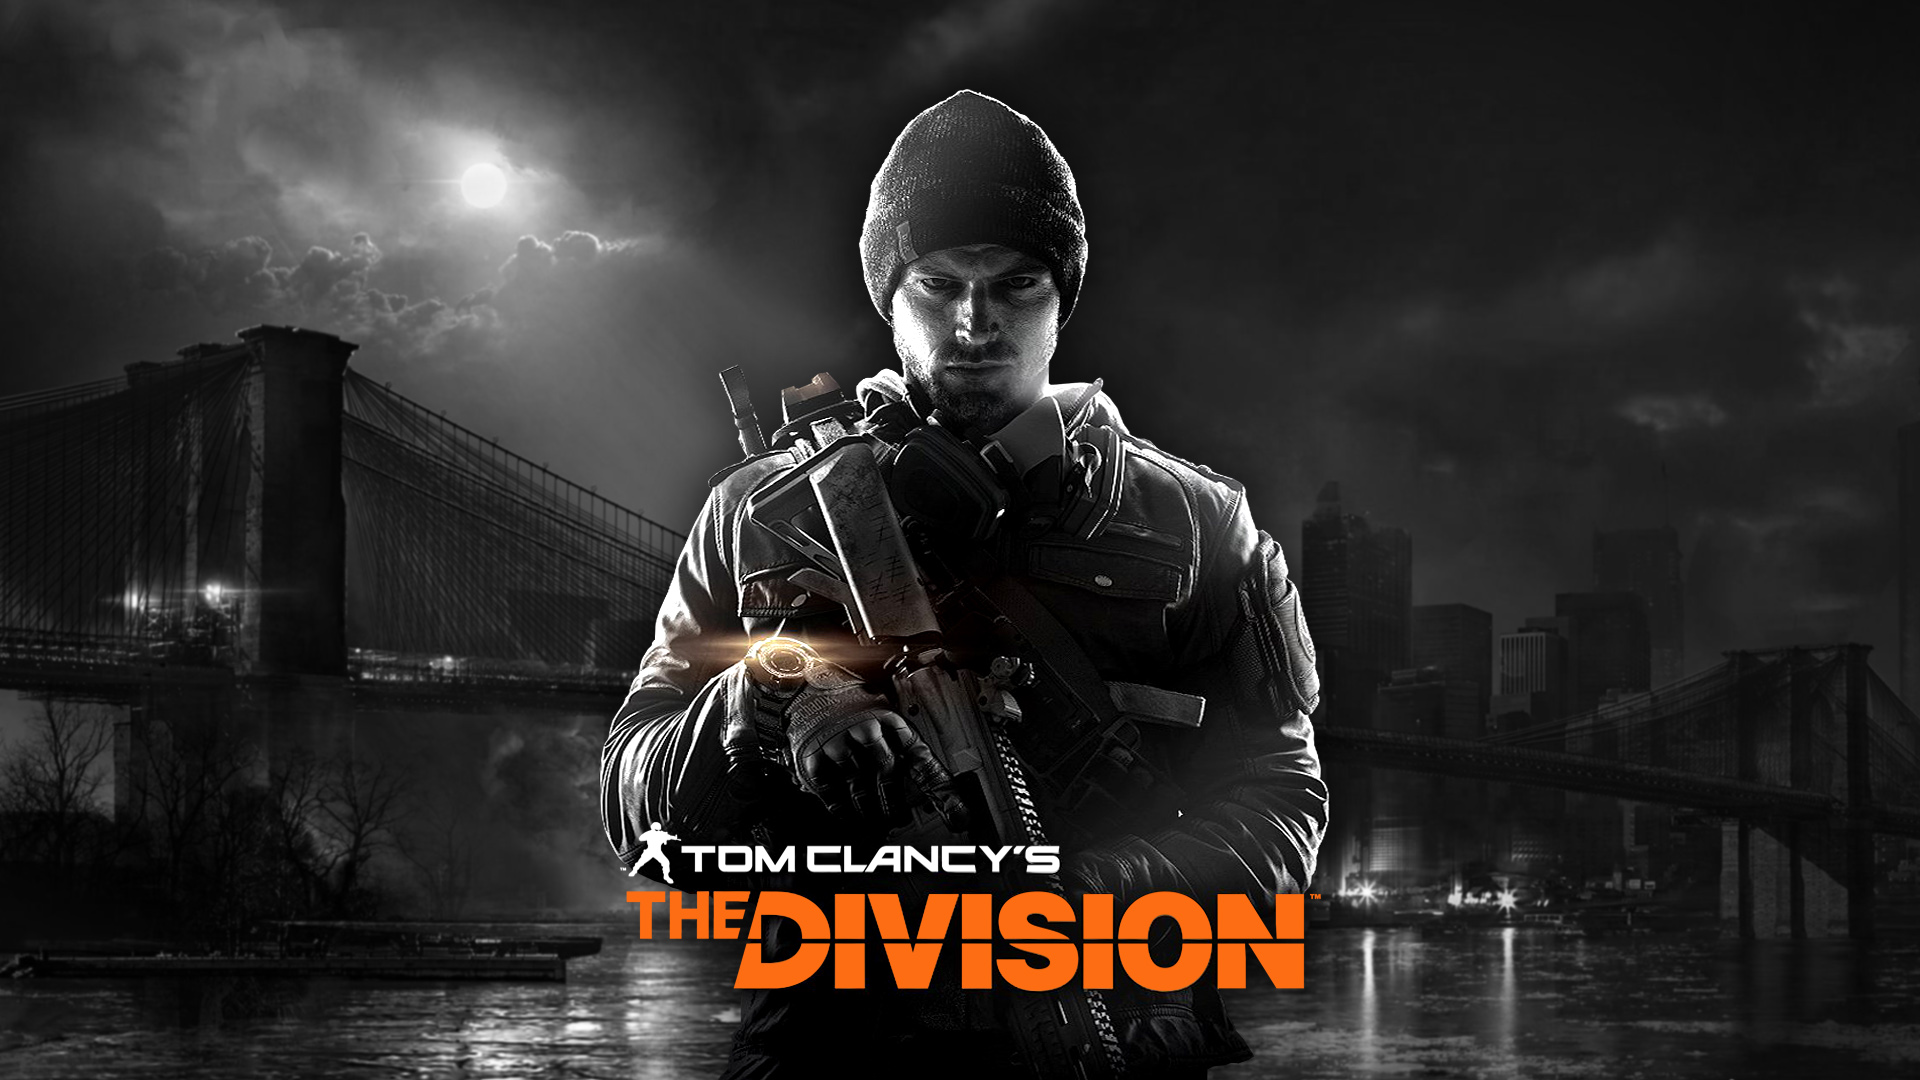 The Division Wallpaper Pictures Image